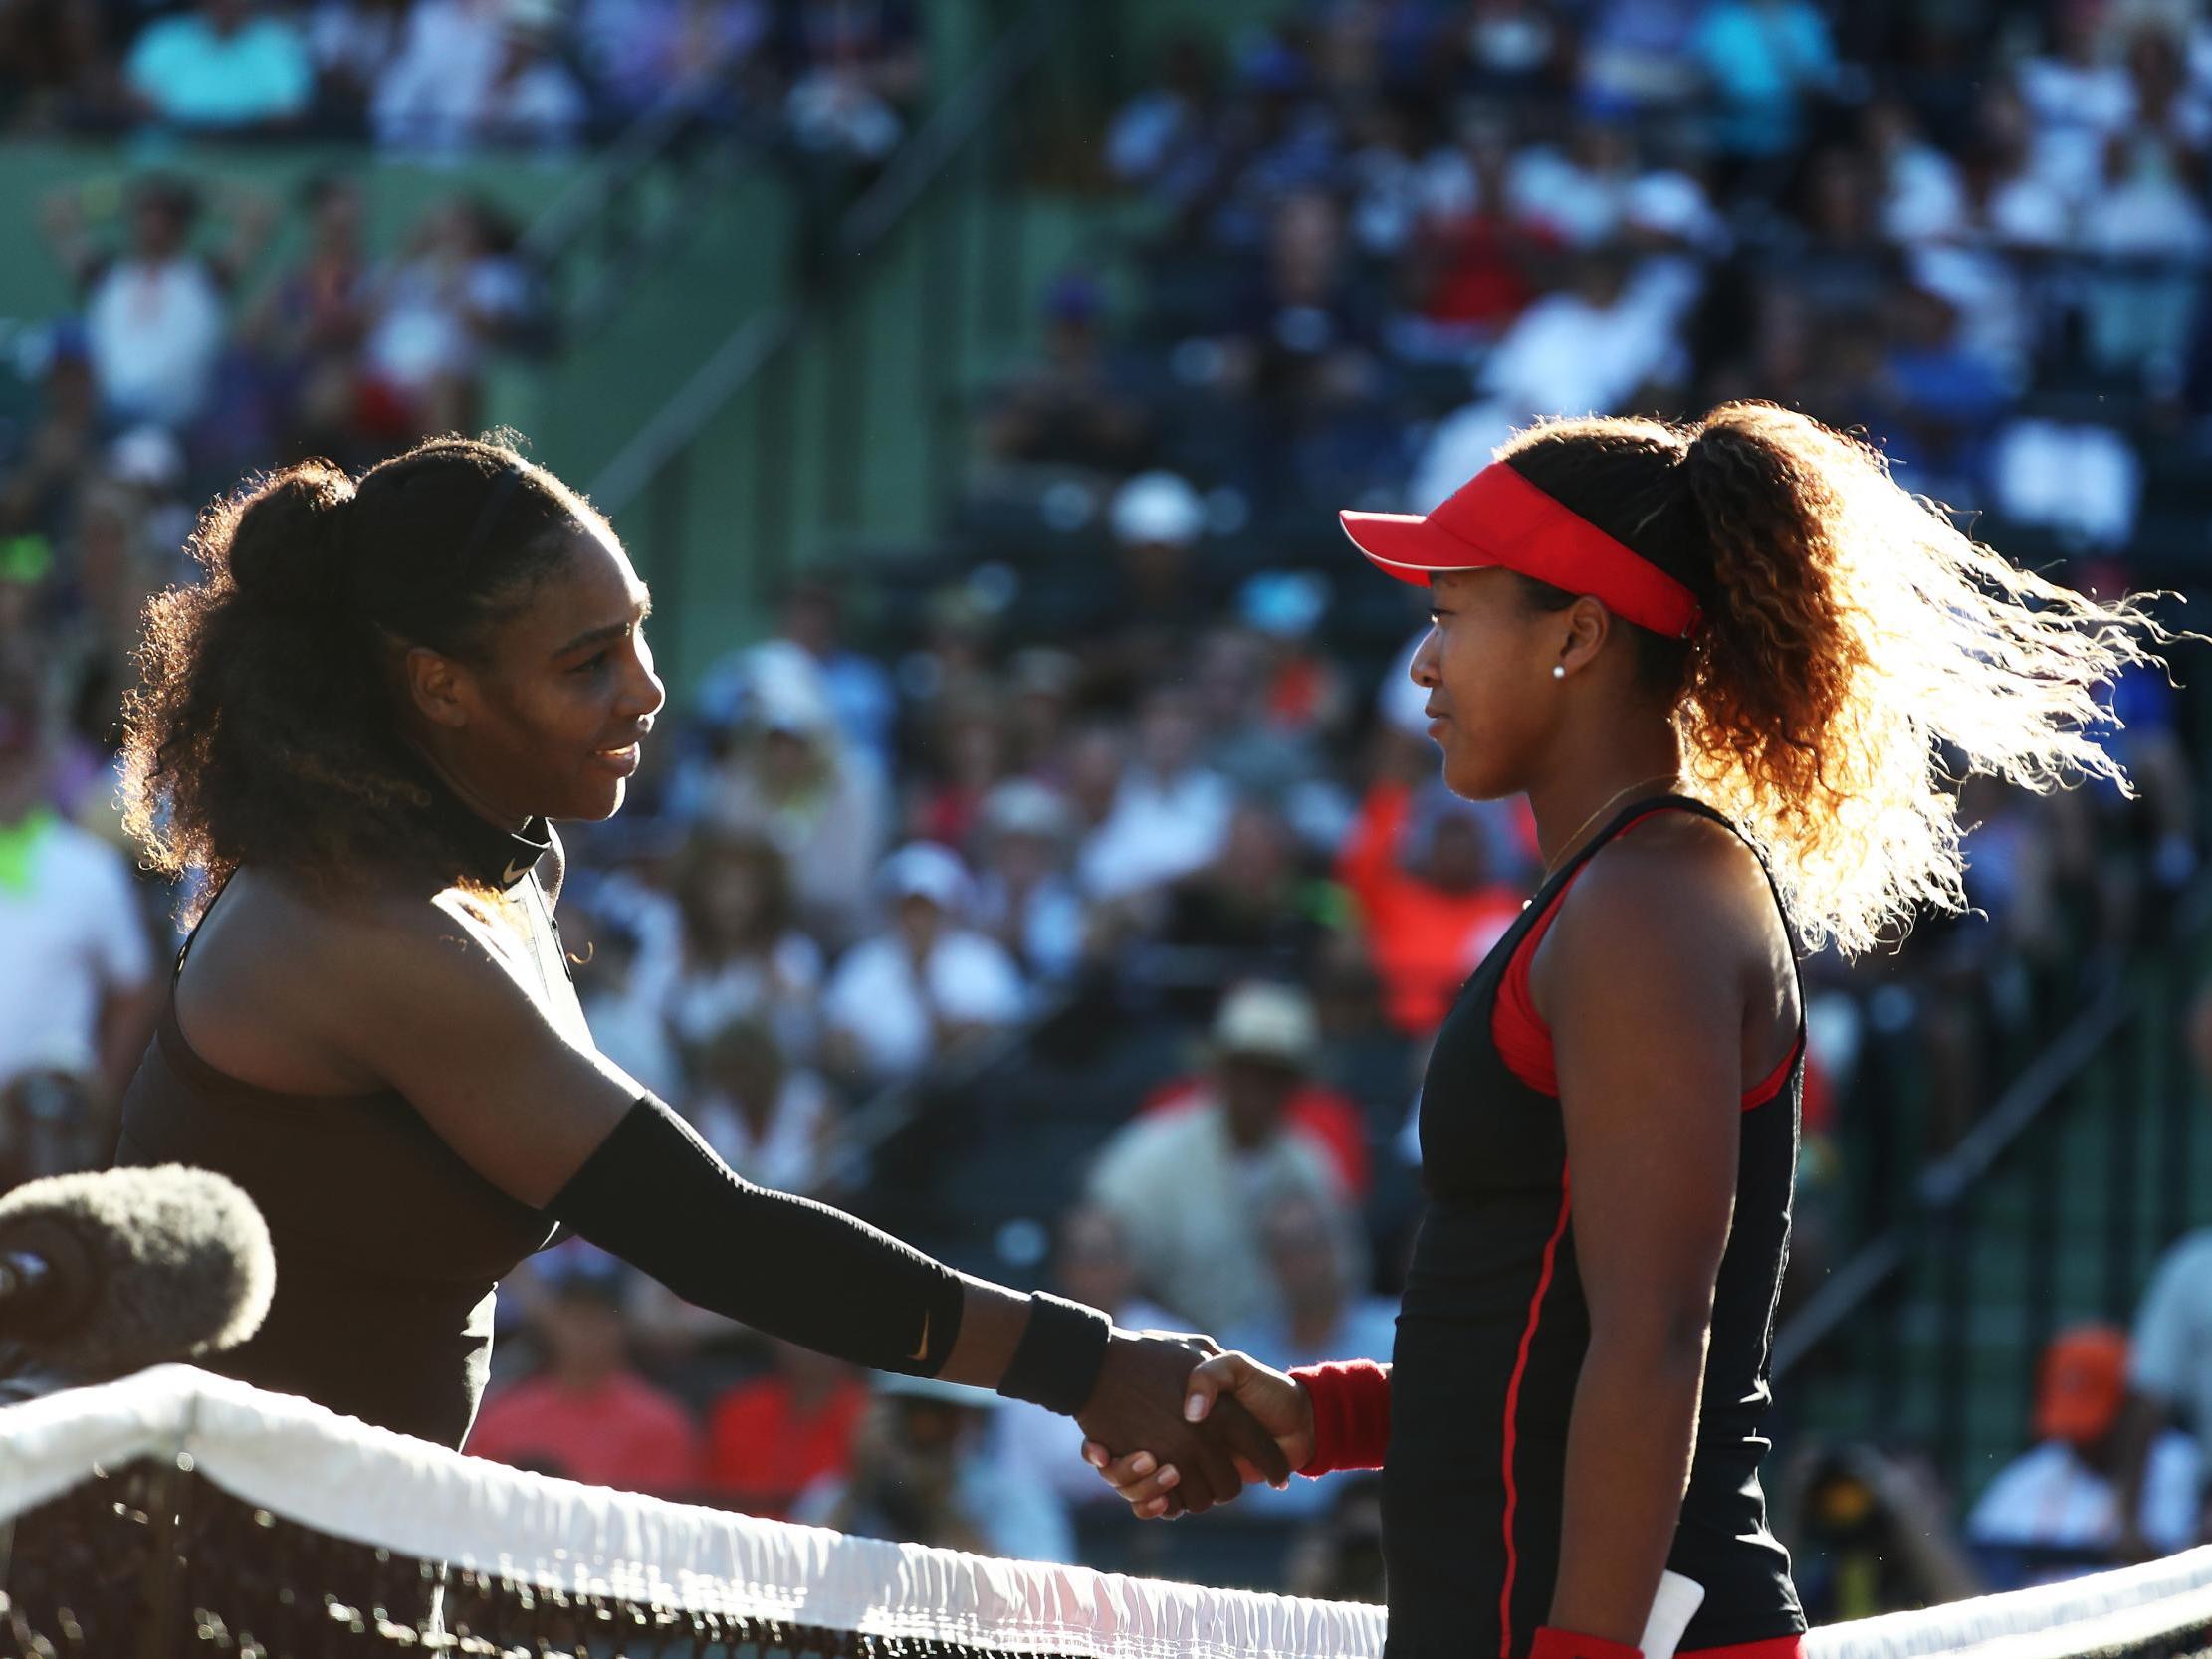 The only previous meeting between the two players came at this year's Miami Open